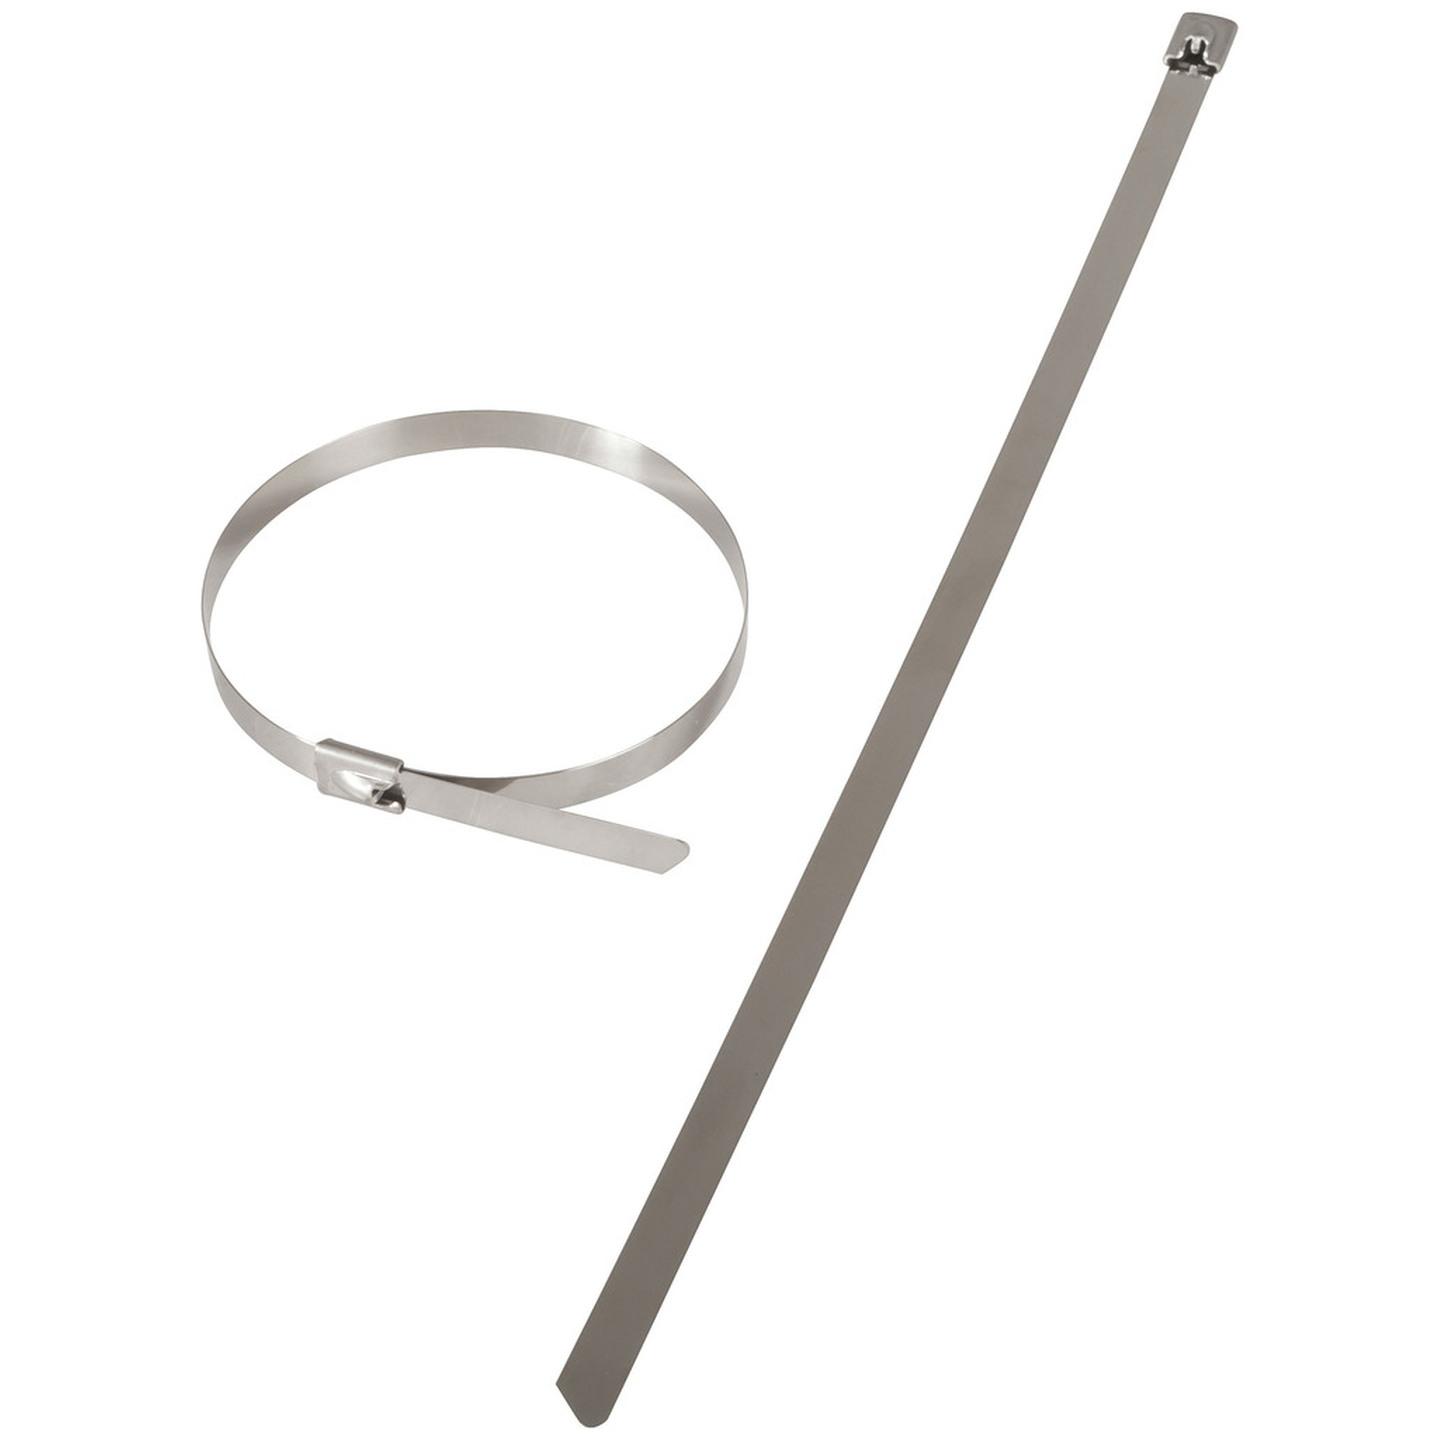 200 x 7.9mm Stainless Steel Cable Ties - 10 Pack